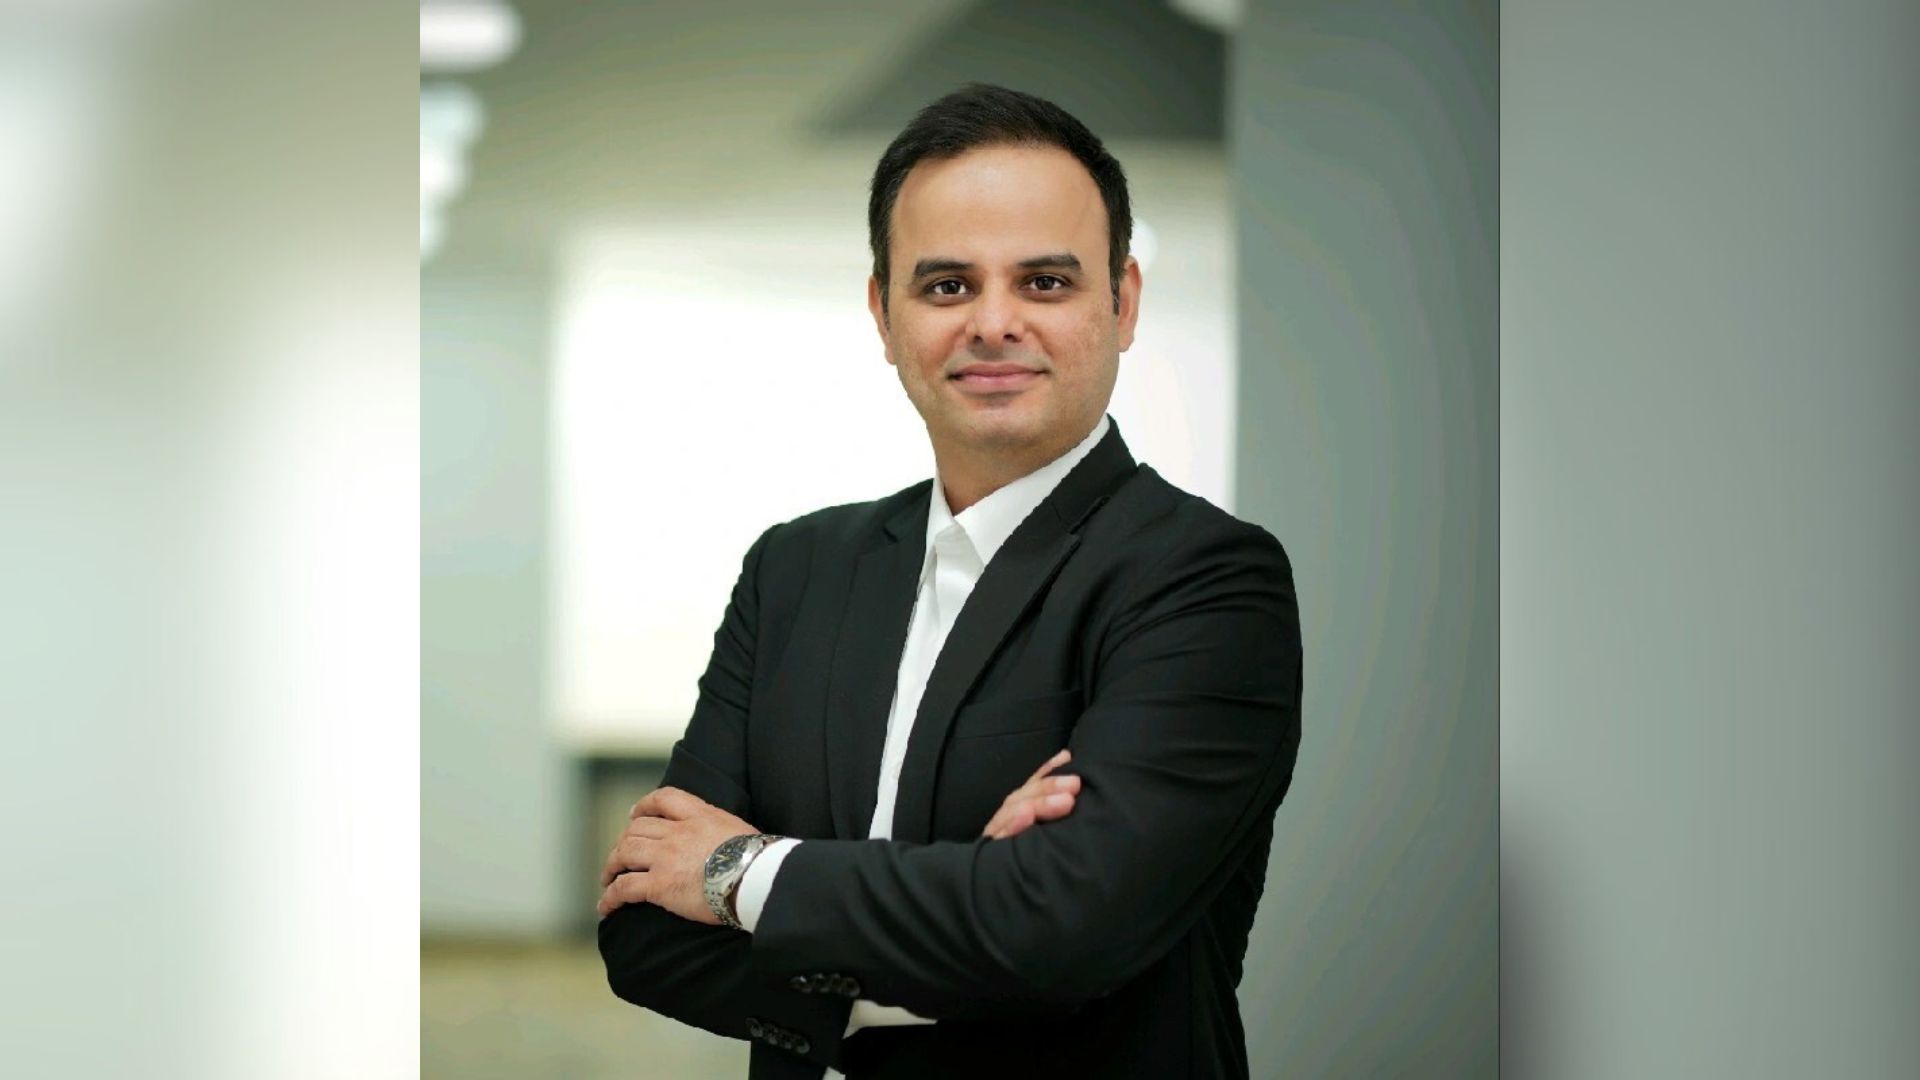 vishal-lathwal-takes-charge-as-ceo-of-apollo-homecare-business